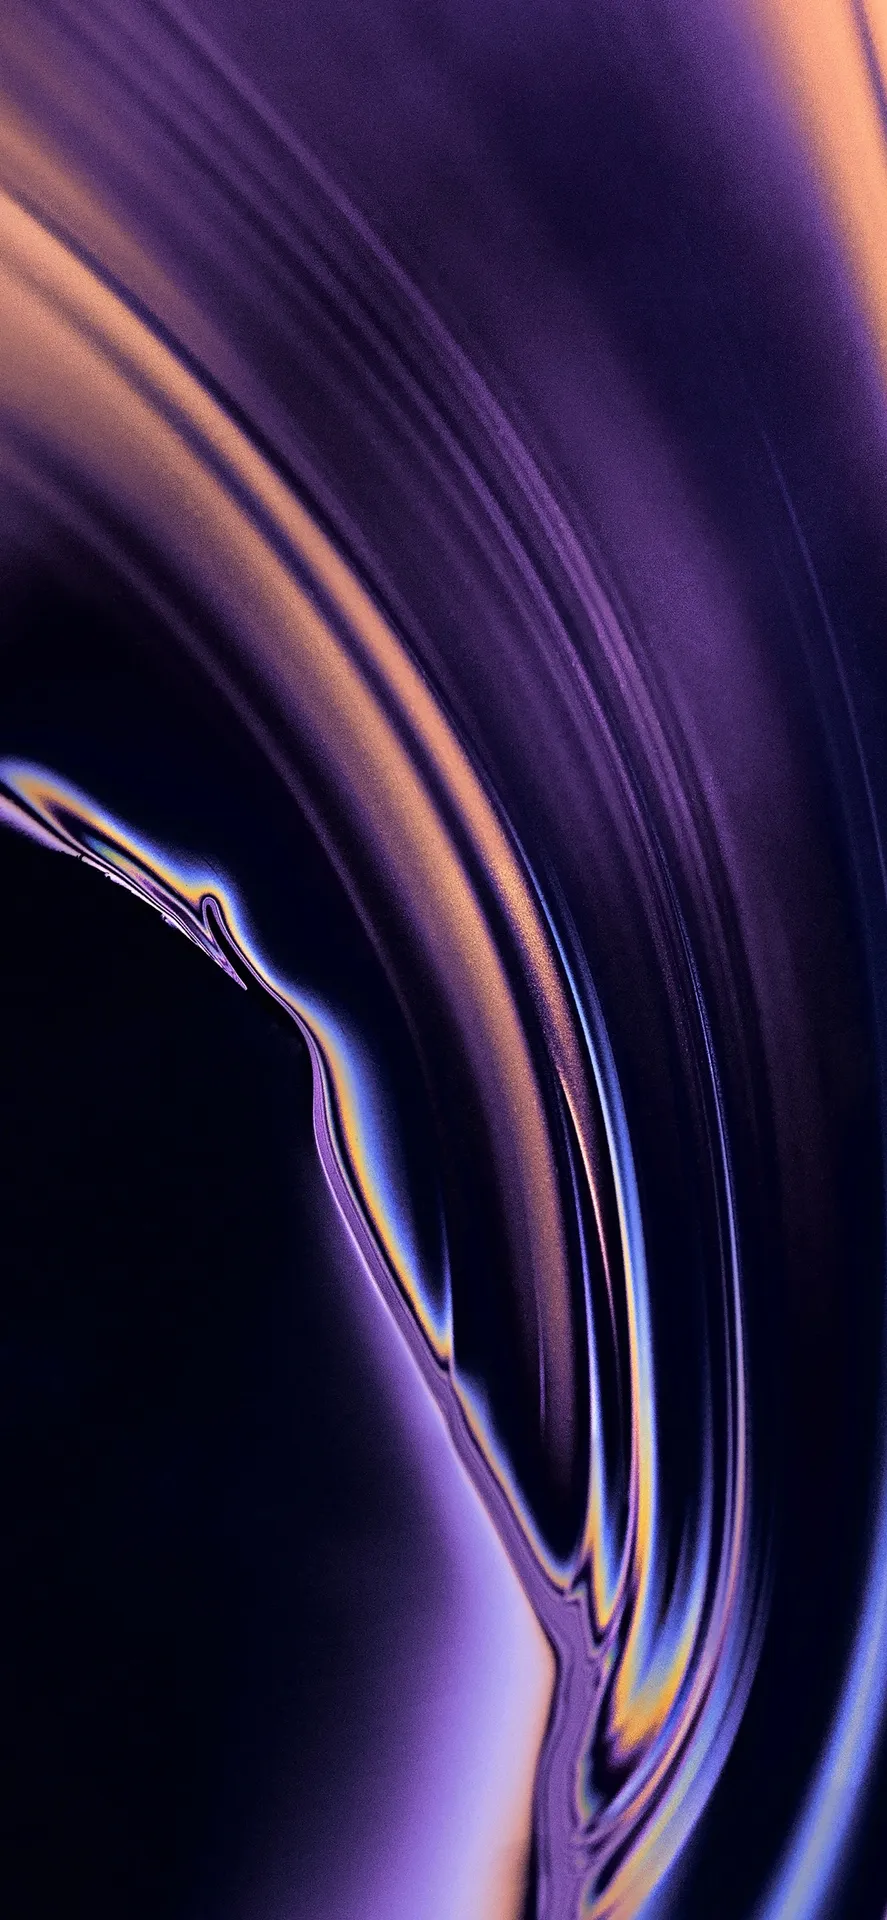 Abstract Iphone Wallpaper